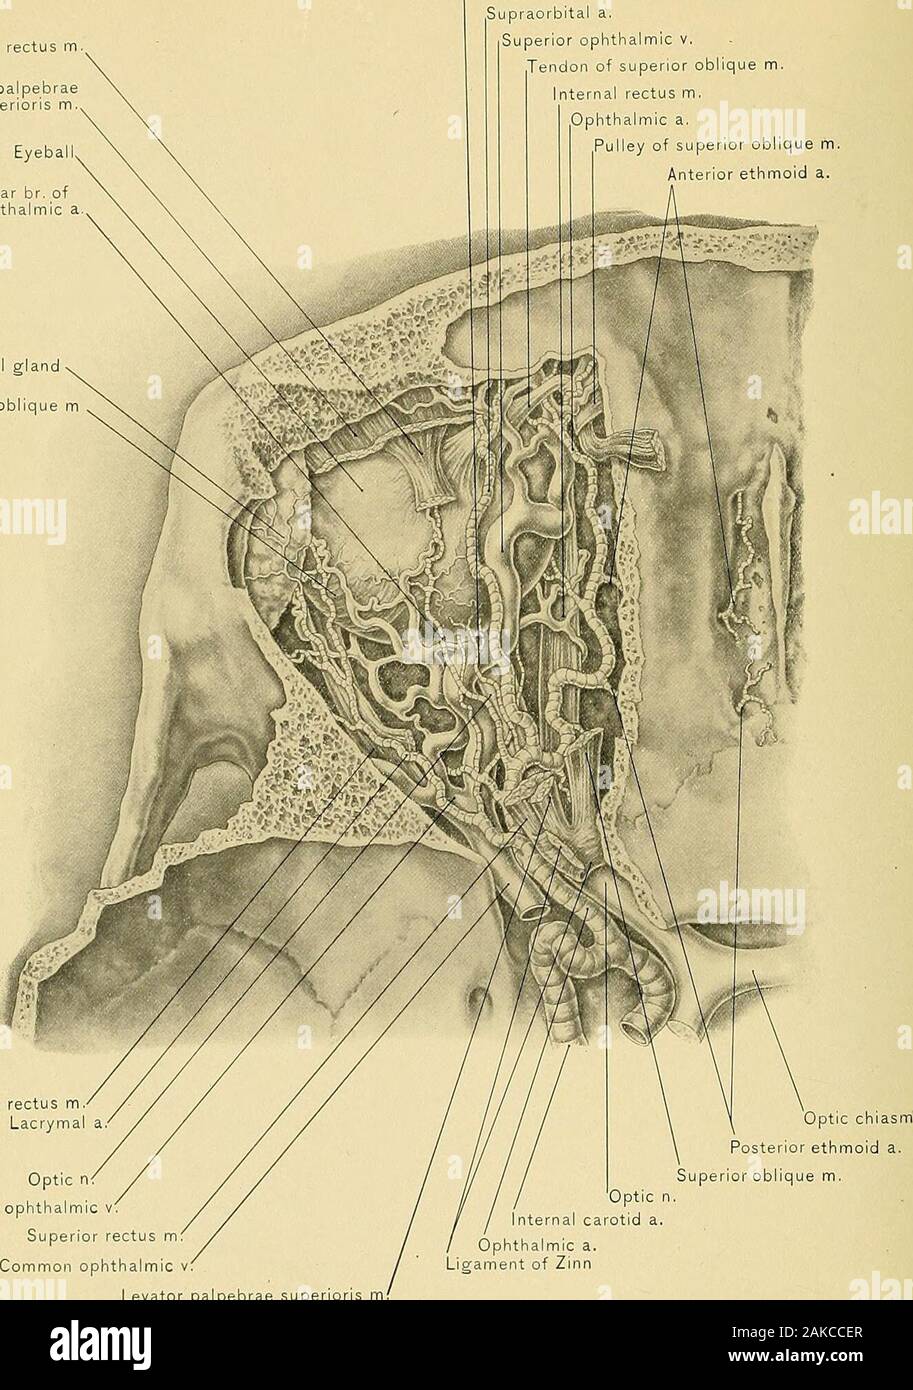 Surgical anatomy : a treatise on human anatomy in its application to the practice of medicine and surgery . mmediately under the superior rectus muscle, taking a position betweenthe superior oblique muscle and the internal rectus muscle. After giving off theinfra-trochlear branch, it leaves the orbit through the anterior ethmoid foramen.It then takes the following course : Having passed through the anterior ethmoidforamen, it again becomes an occupant of the cranial cavity, lying between thedura mater and the cribriform plate of the ethmoid bone. Here it leaves thecranial Qa.Viiy through the e Stock Photo